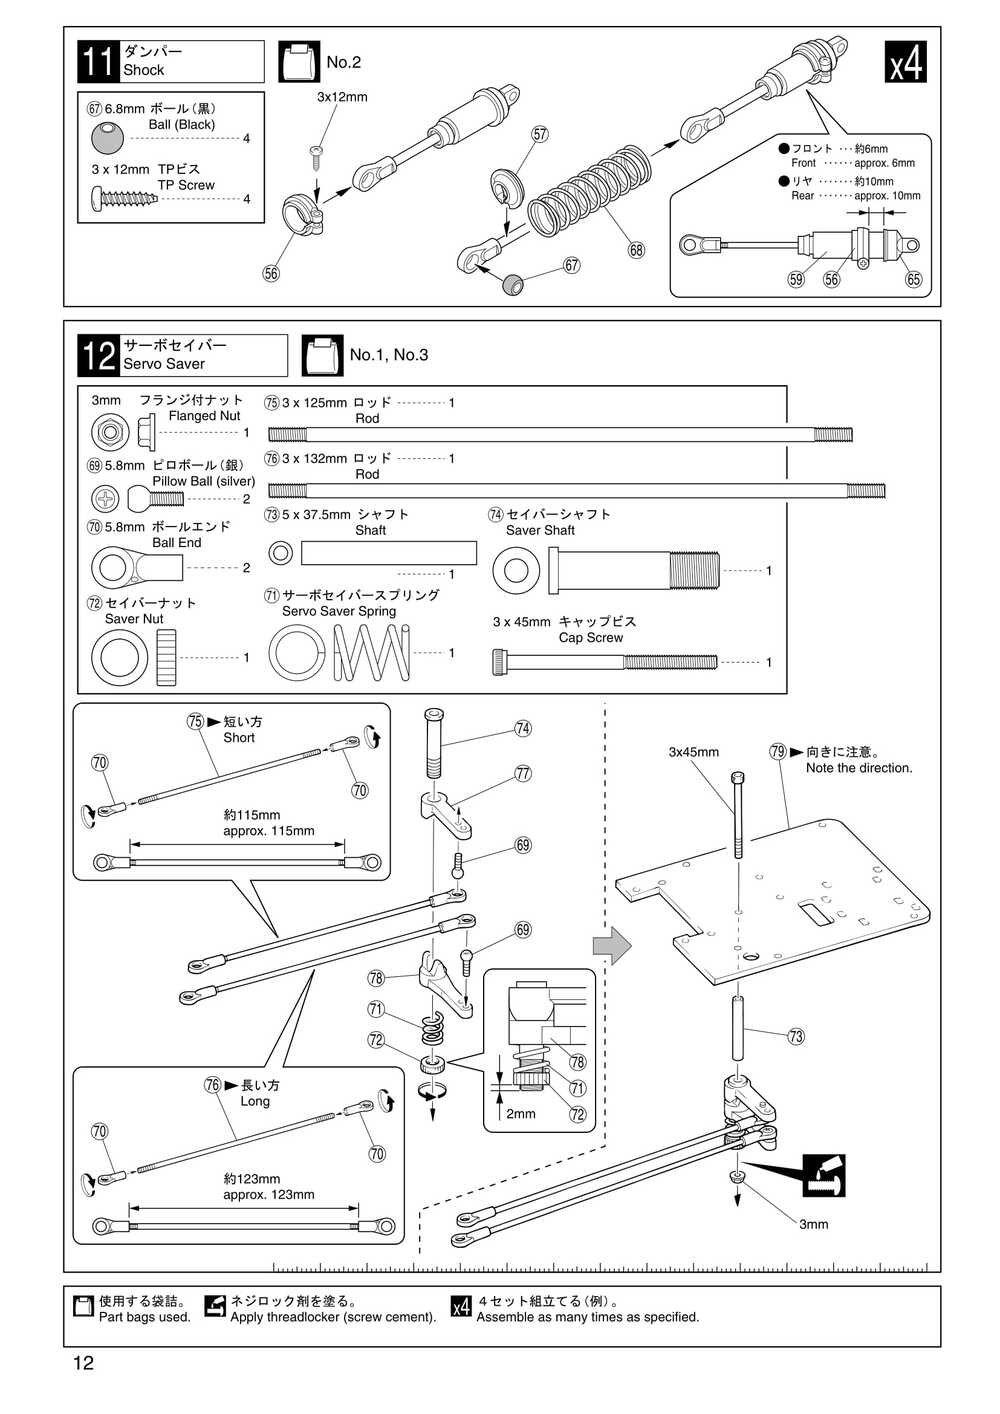 Kyosho - 31221 - Mad-Force - Manual - Page 12